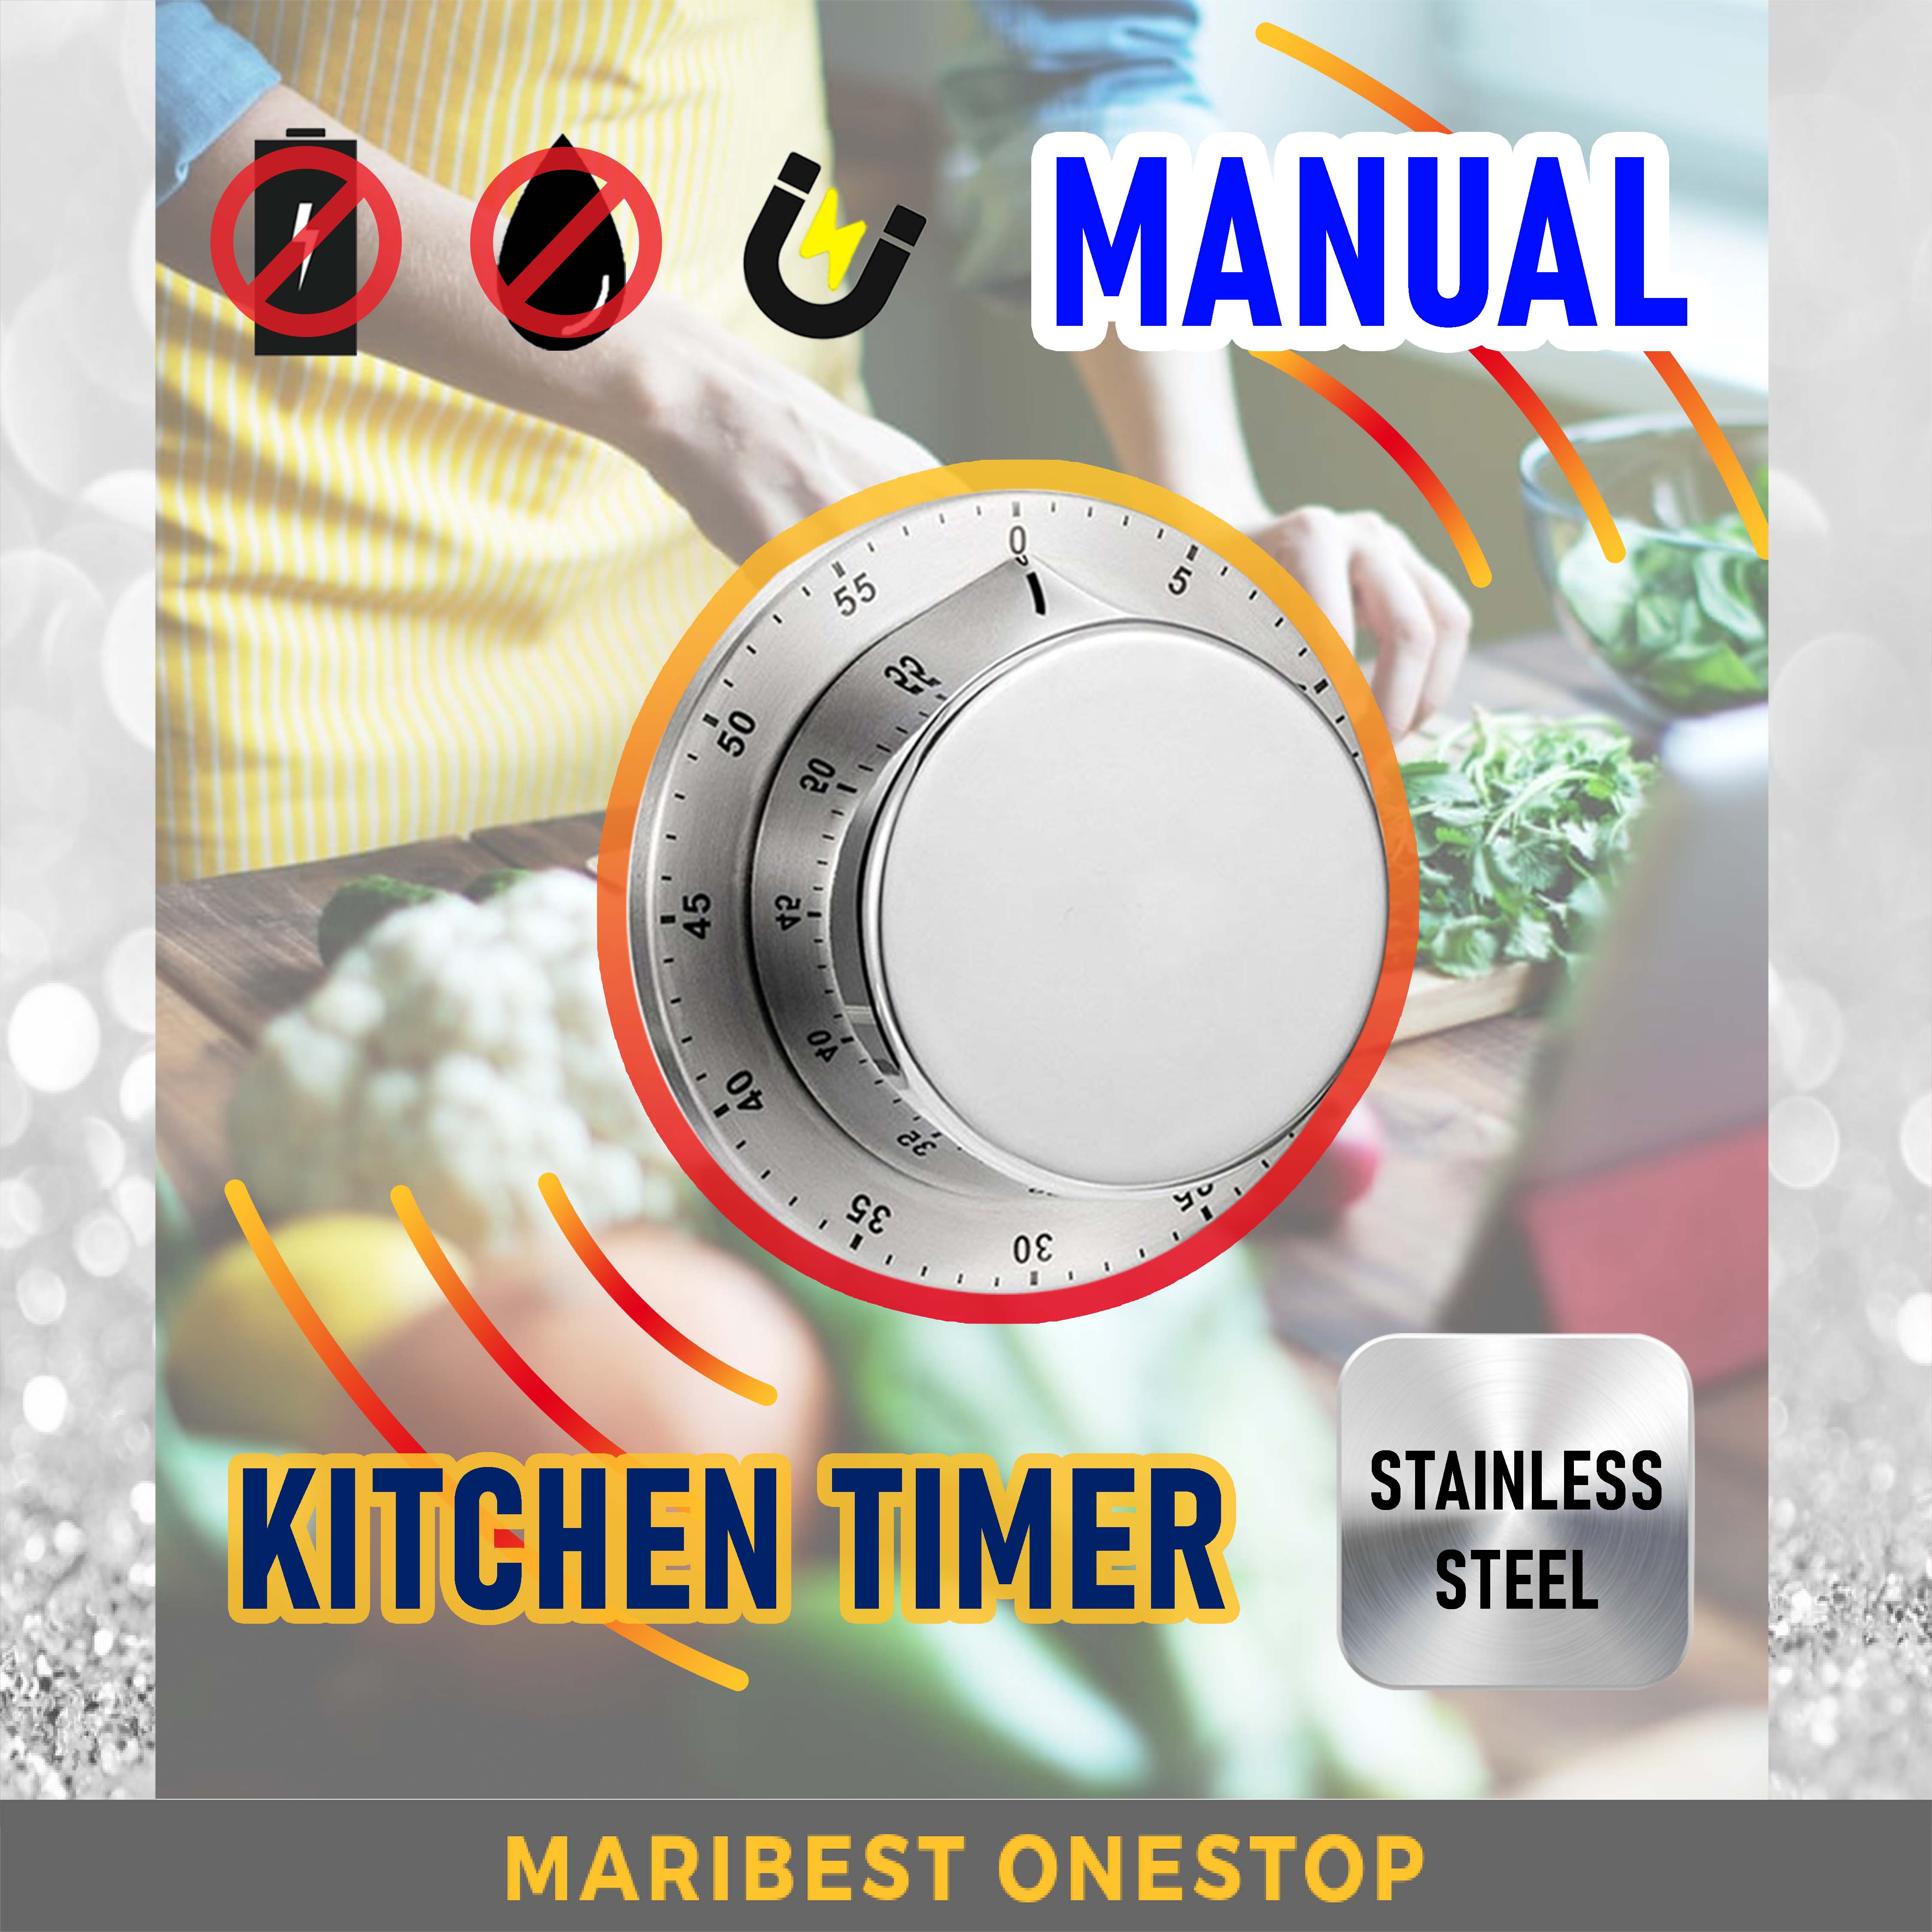 STAINLESS BASE STEEL KITCHEN TIMER COOKING TIMER MANUAL MAGNETIC COUNTDOWN NO BATTERY REMINDER LOUD ALARM MECHANICAL